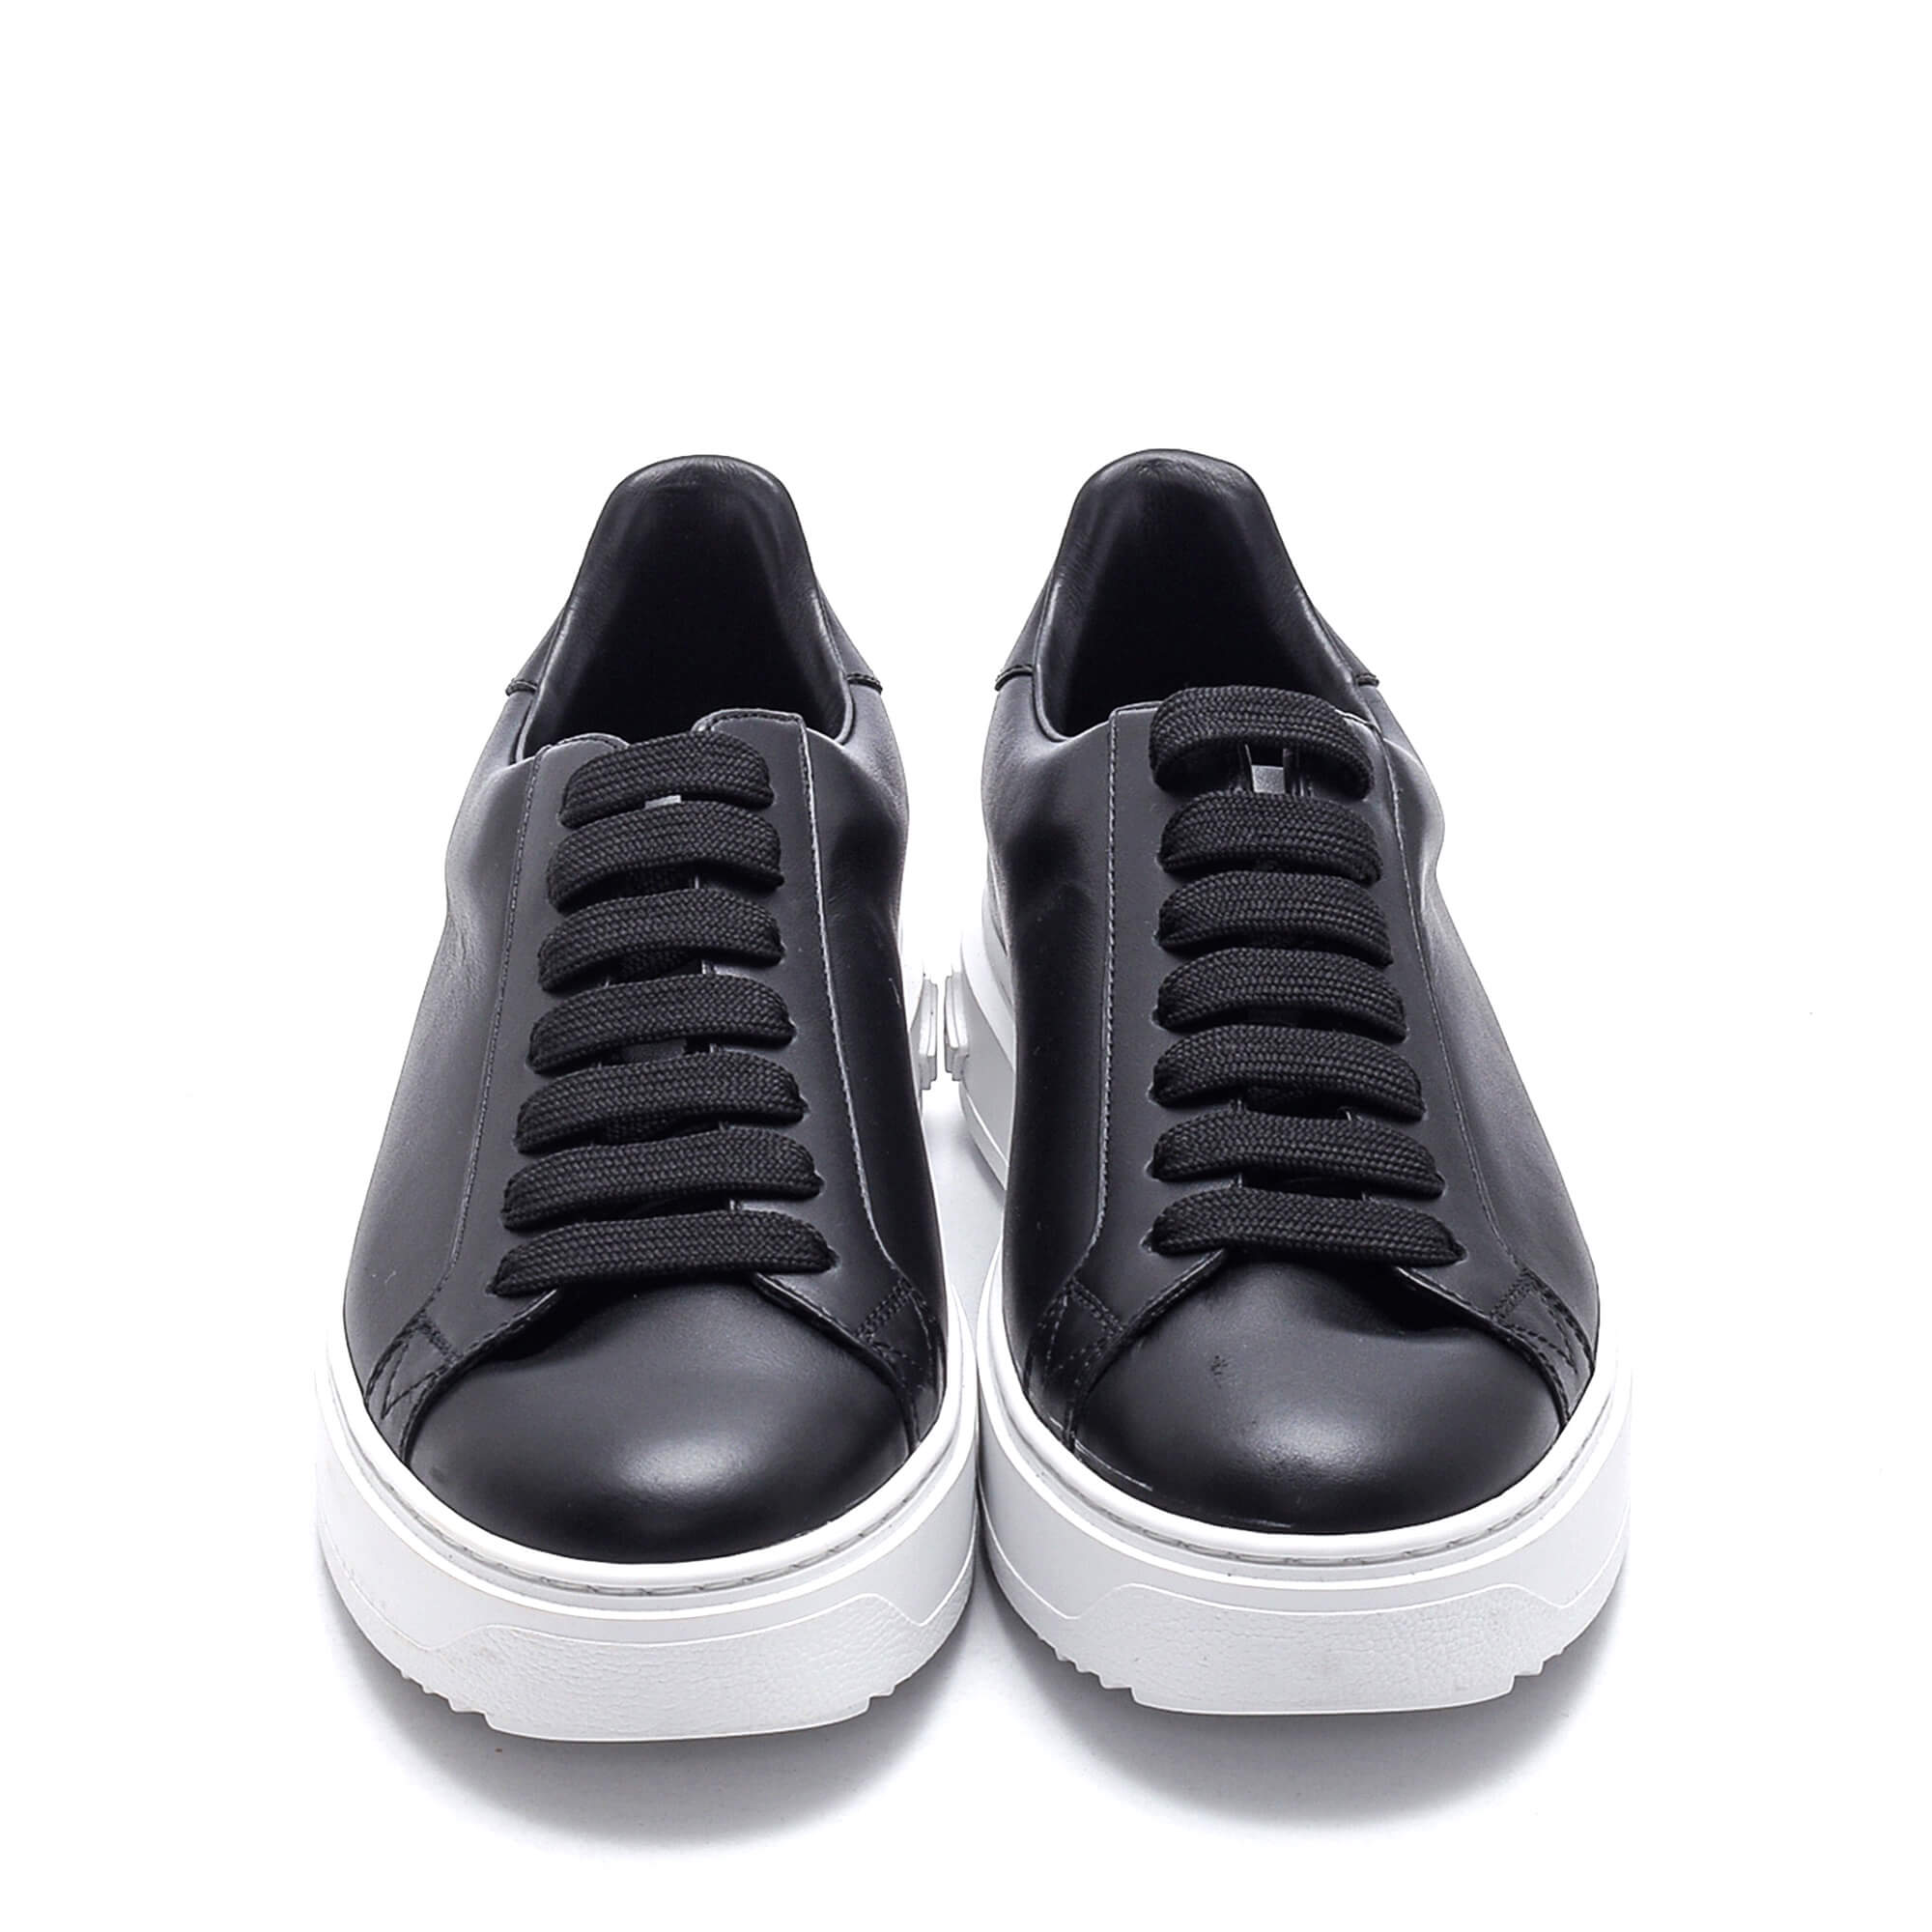 Louis Vuitton - Black / White Leather Trainers 